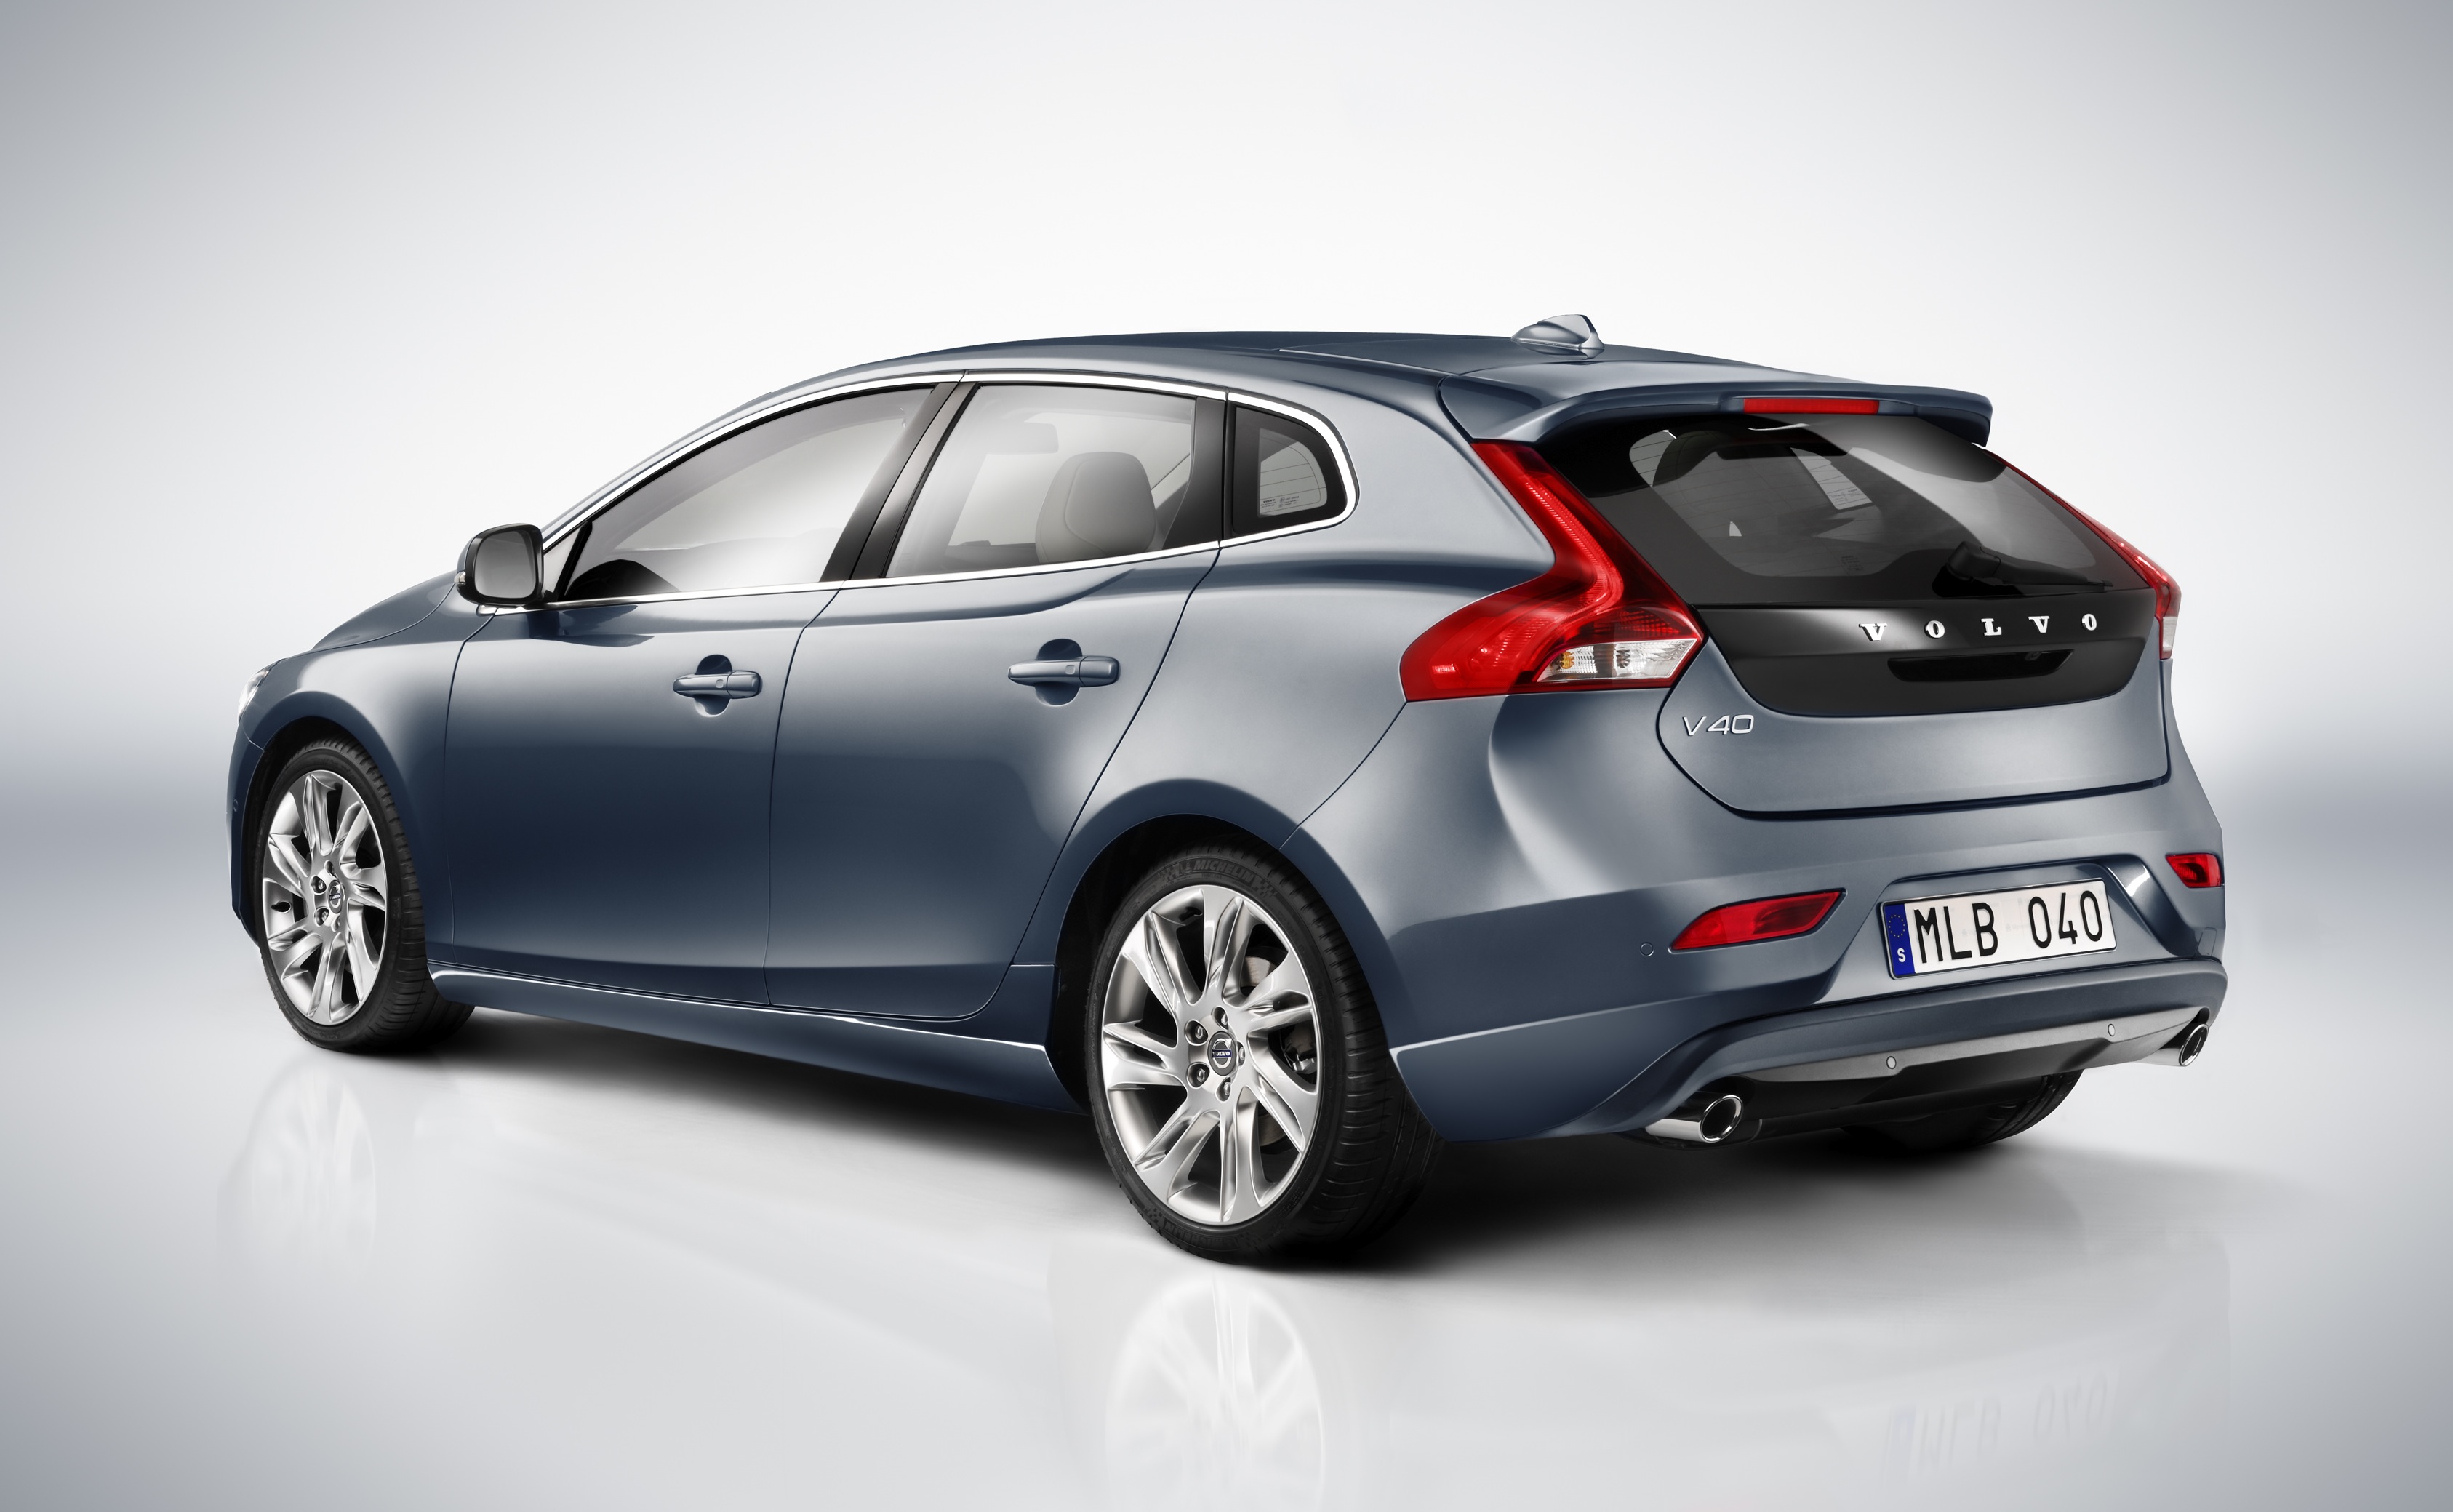 Volvo V40: new hatch will be oldest model by 2015 - Photos (1 of 5)